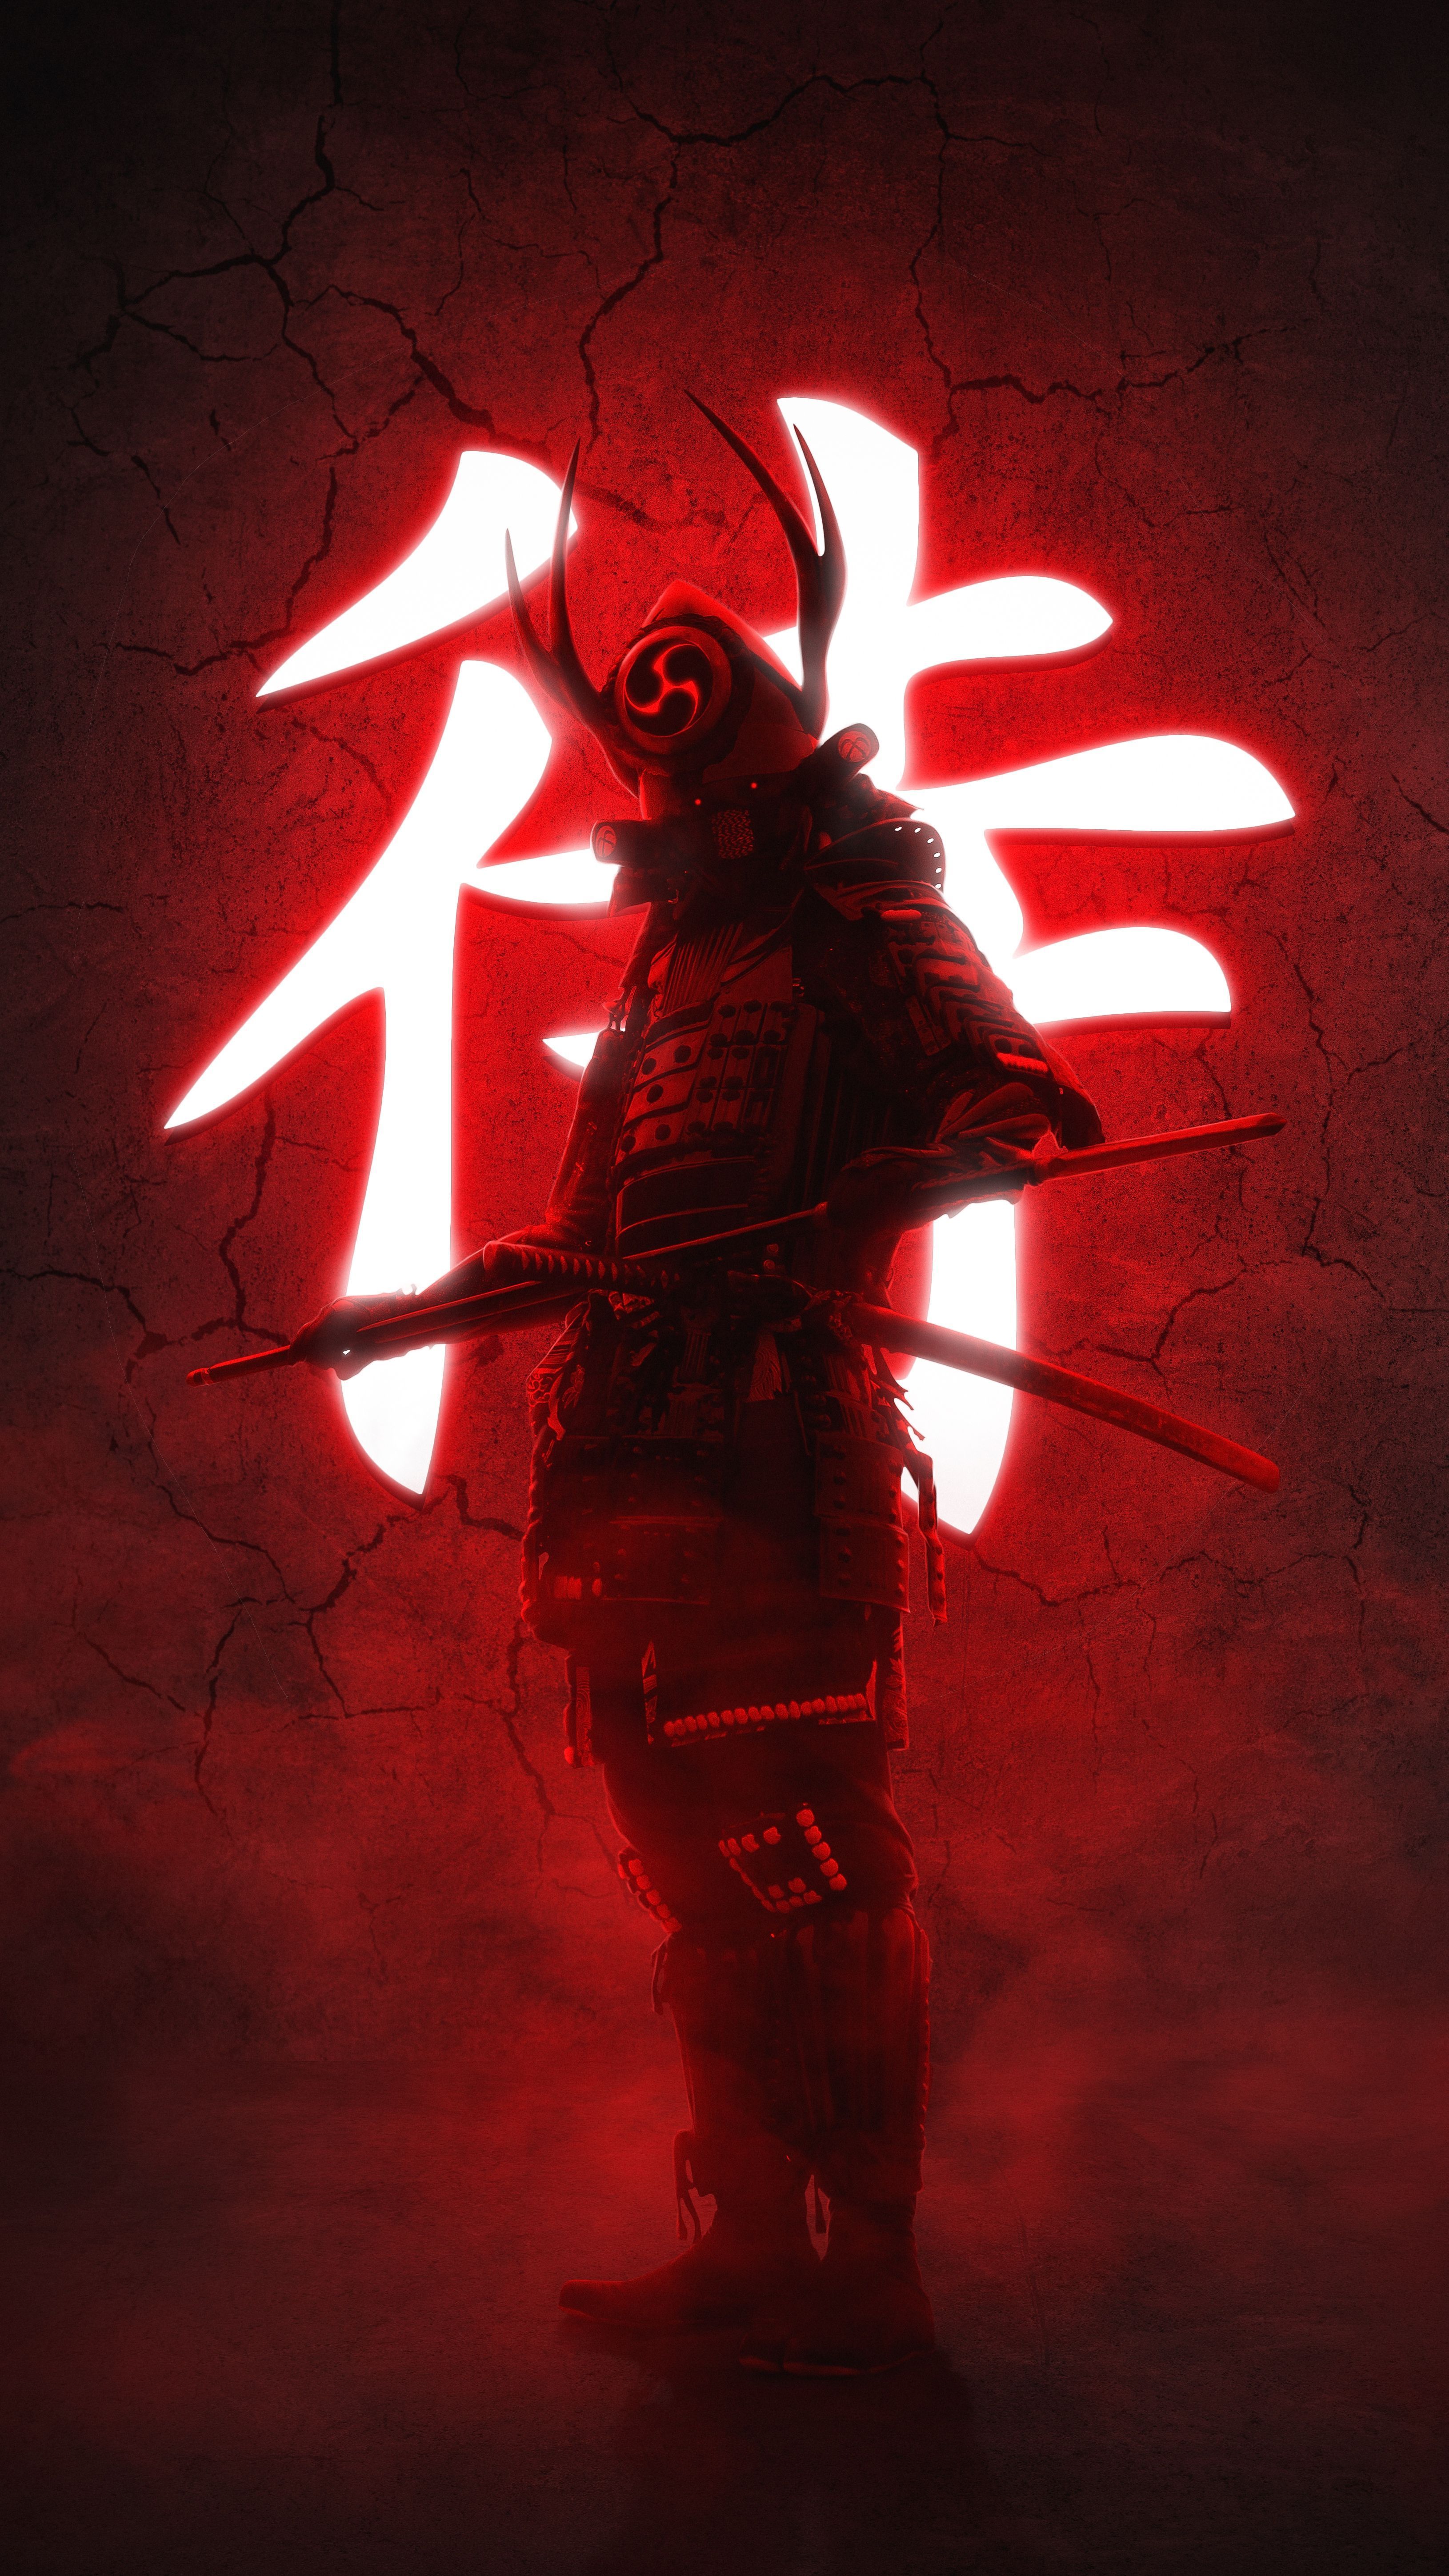 A samurai stands in front of a red glowing kanji character for 